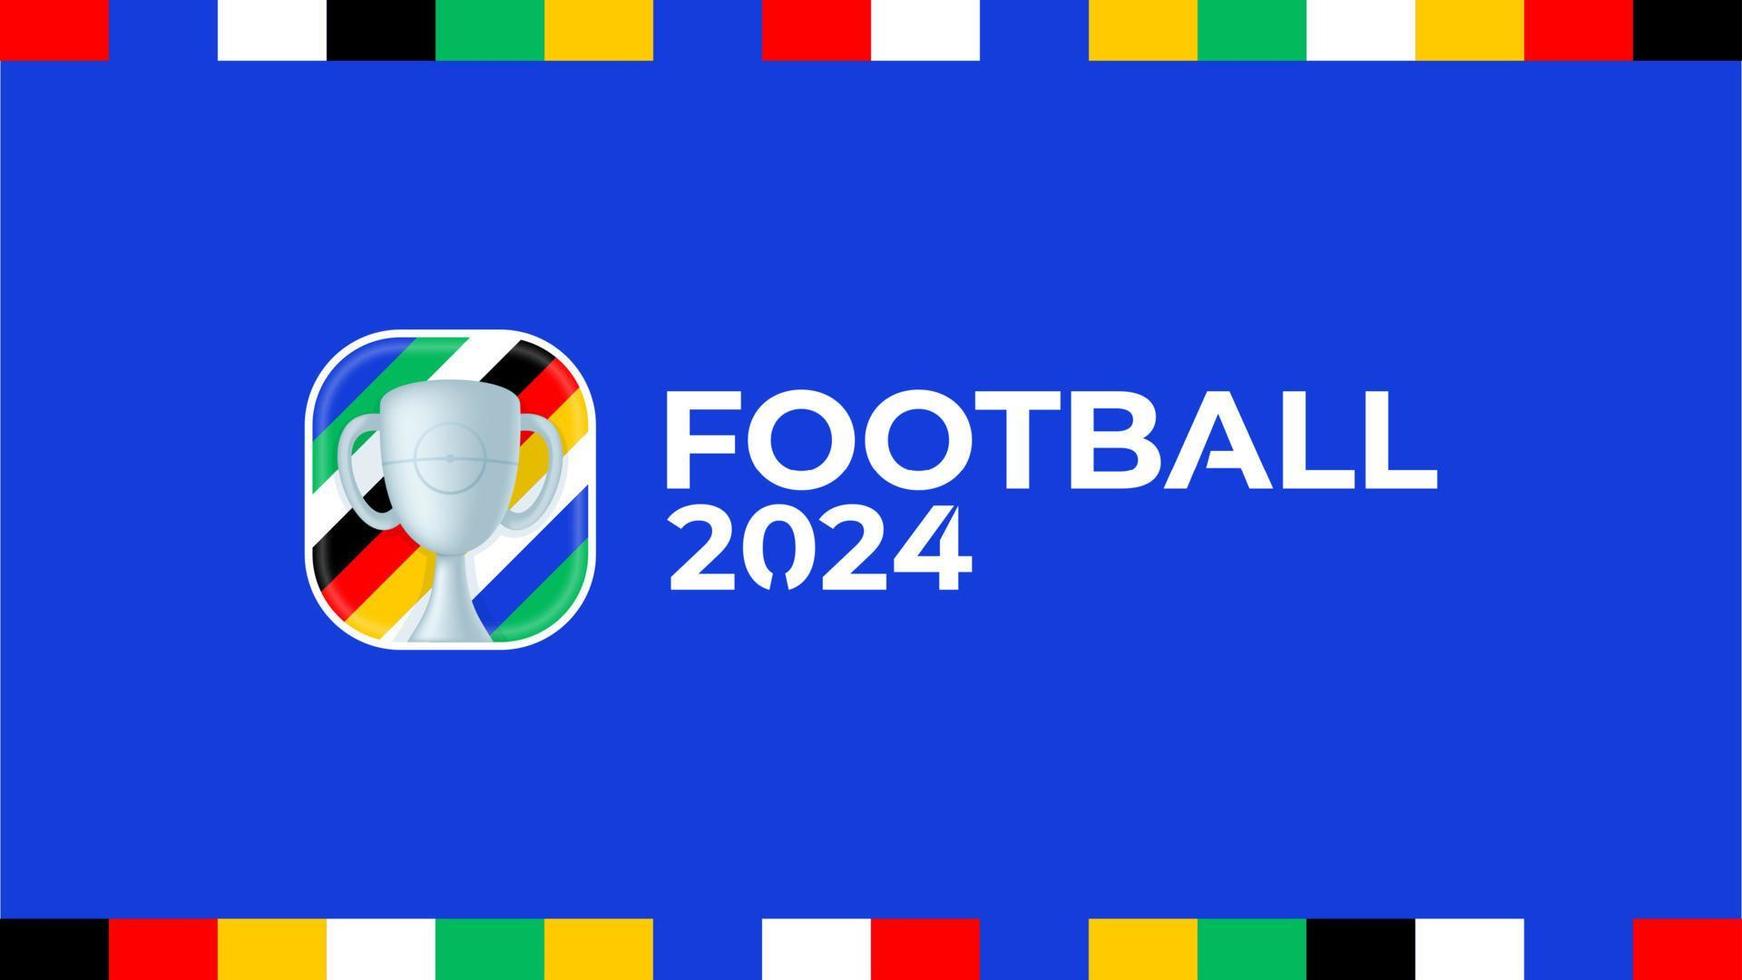 2024 Football Championship Logo Football Or Soccer 2024 Logotype Emblem On Not Official Blue Background With Country Flag Colourful Lines Sport Football Logo With Cup Trophy Vector 